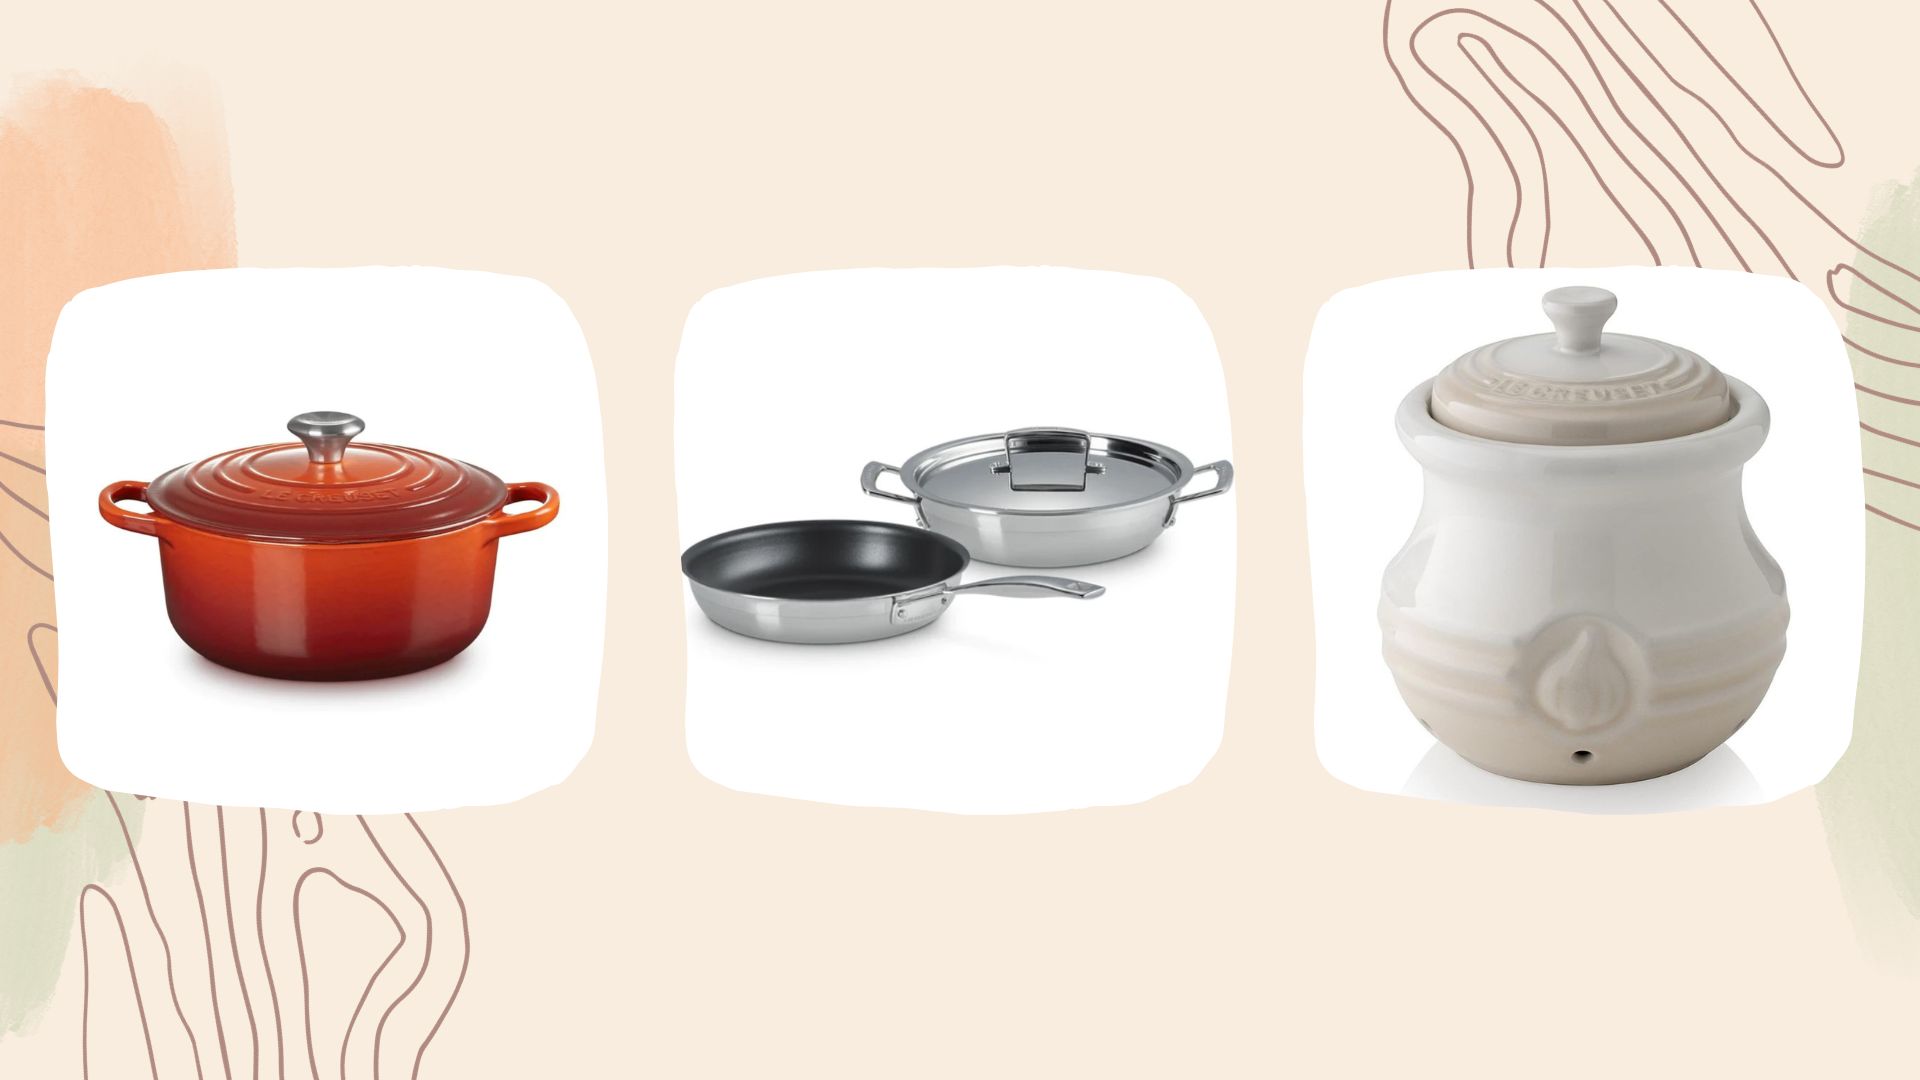 Grab Le Creuset's Holiday Line for Next Year While It's Discounted